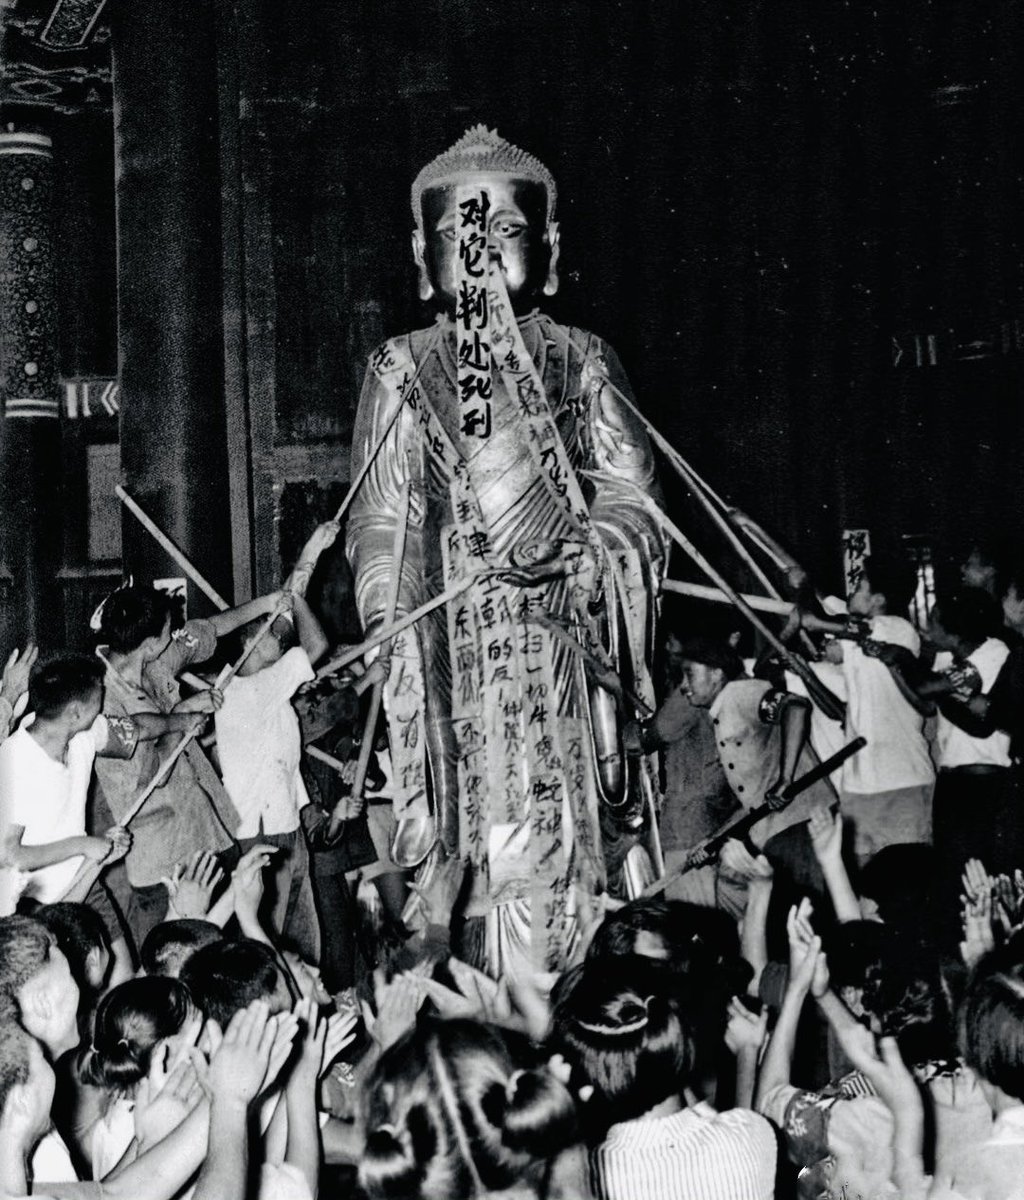 Today, May 16 in 1966: China issued the 'May 16 Notice', starting a ten-year long Cultural Revolution, to eliminate the “4 Olds” (Old Customs / Culture / Habits / Ideas)破四旧. Numorous religious & cultural items destroyed. Heartbreaking! Never repeat again!